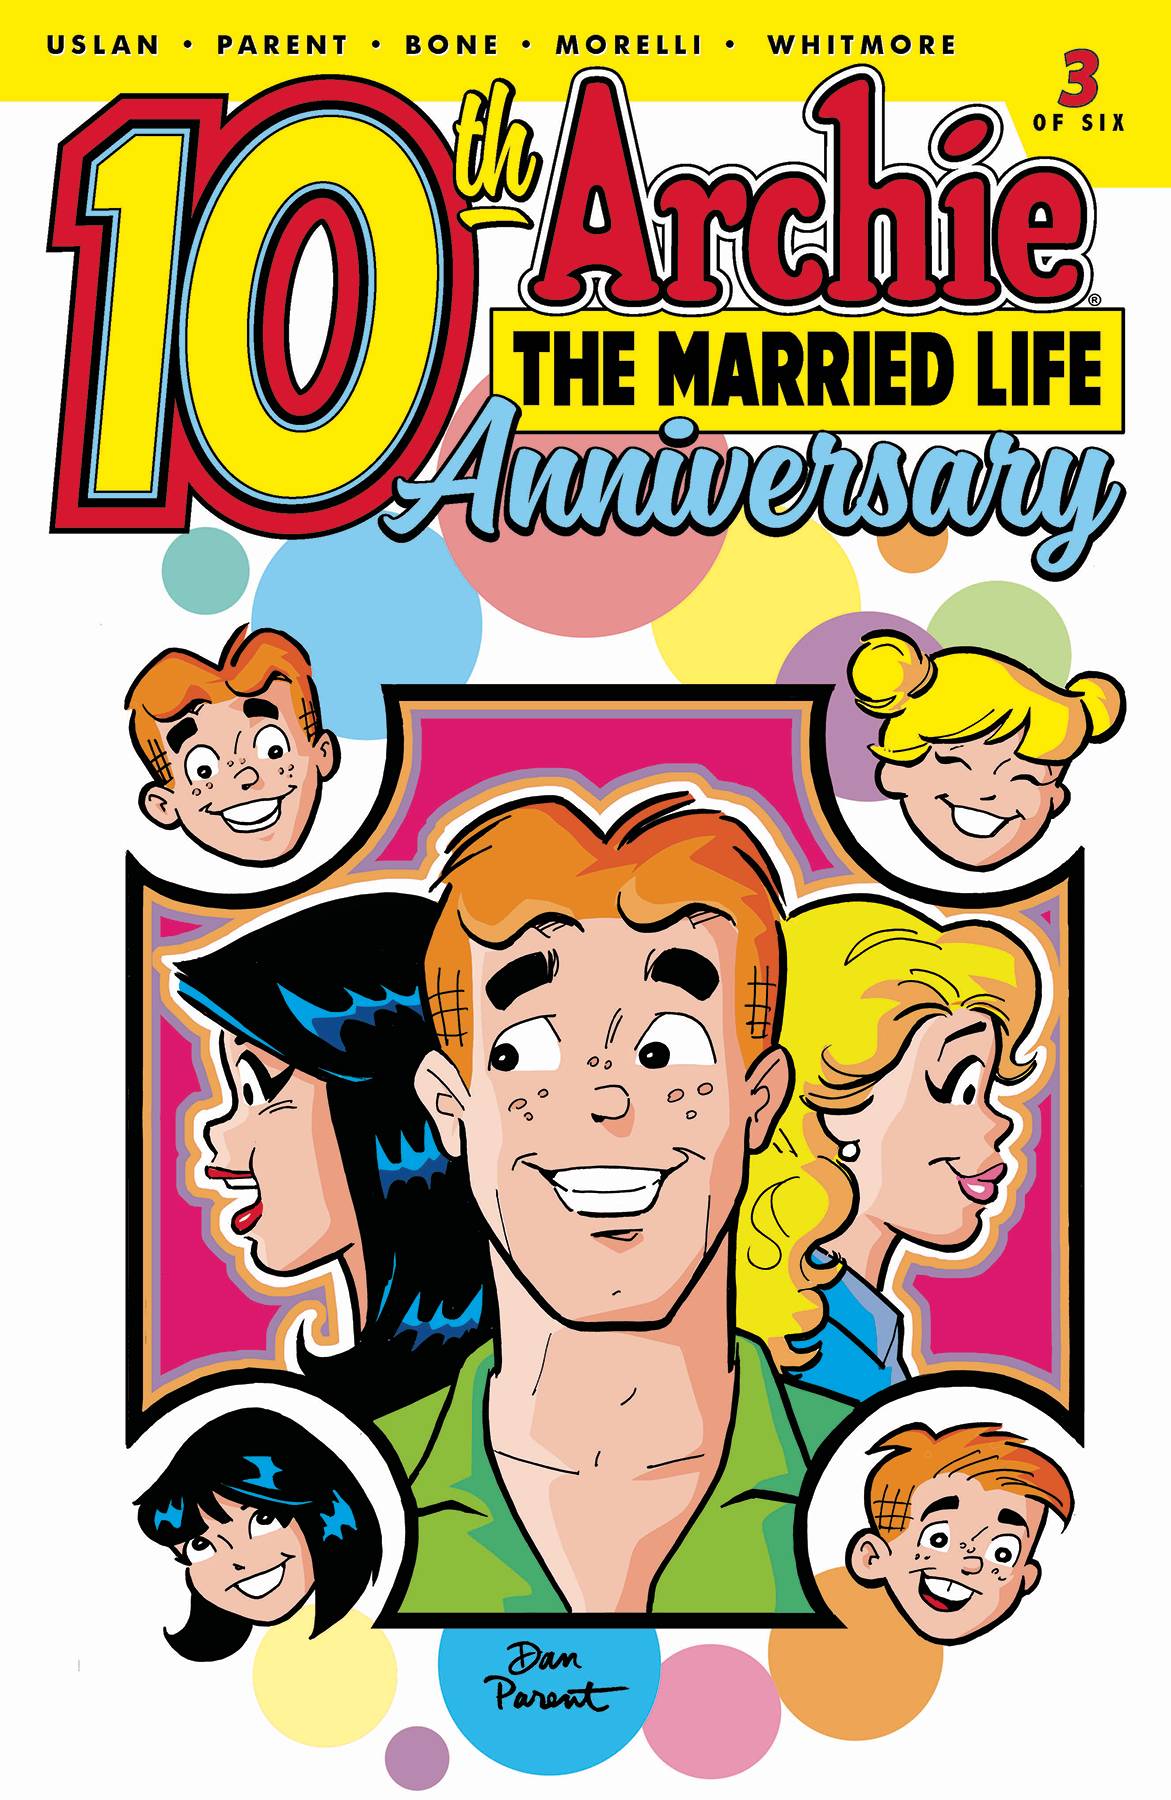 Archie Married Life 10 Years Later #3 Cover A Parent